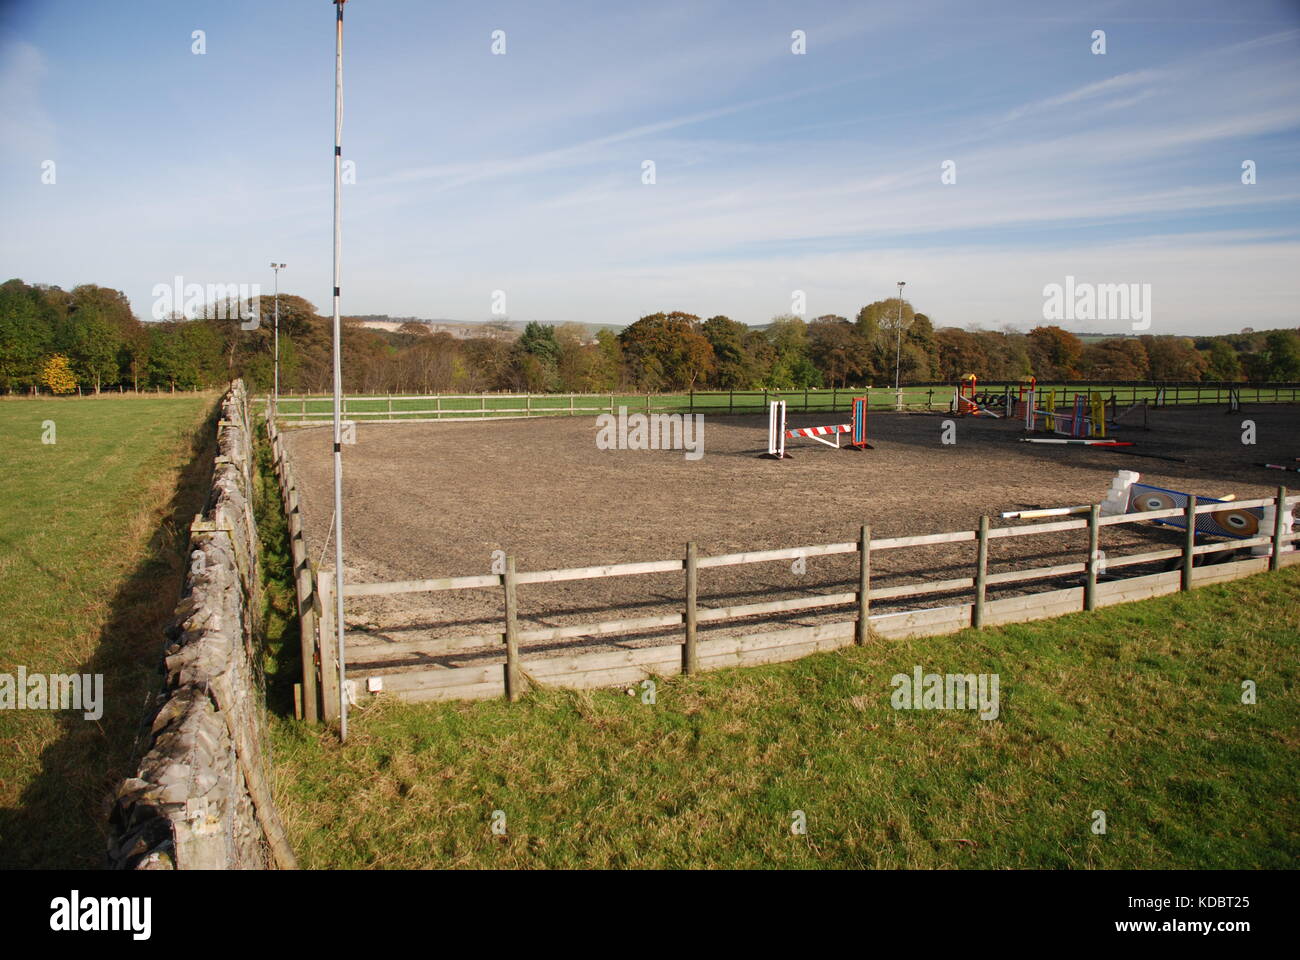 Horse manege for equestrian facilities Stock Photo